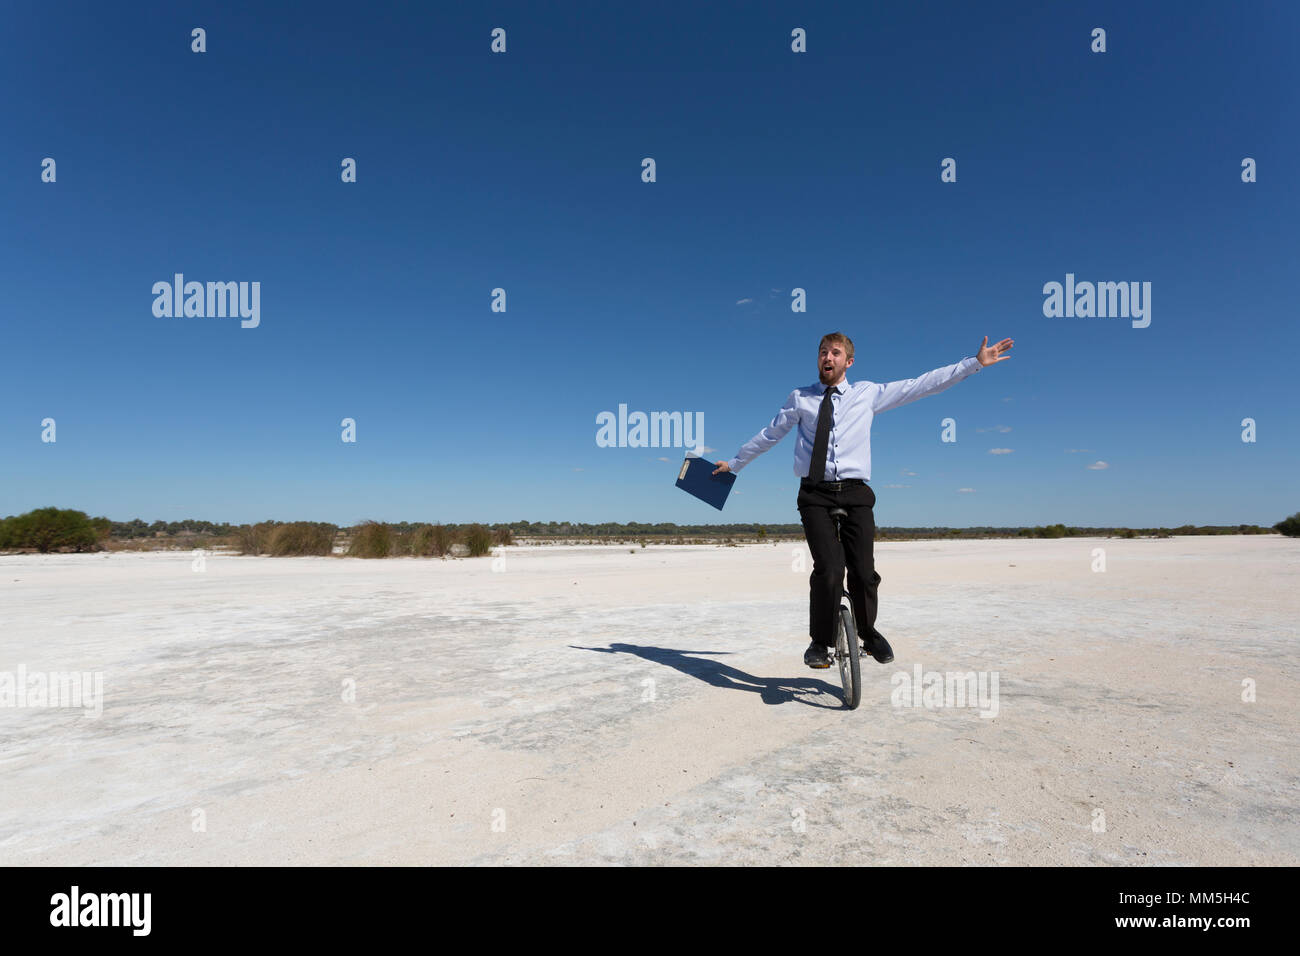 A young Businessman riding a unicycle. Business concepts. Stock Photo